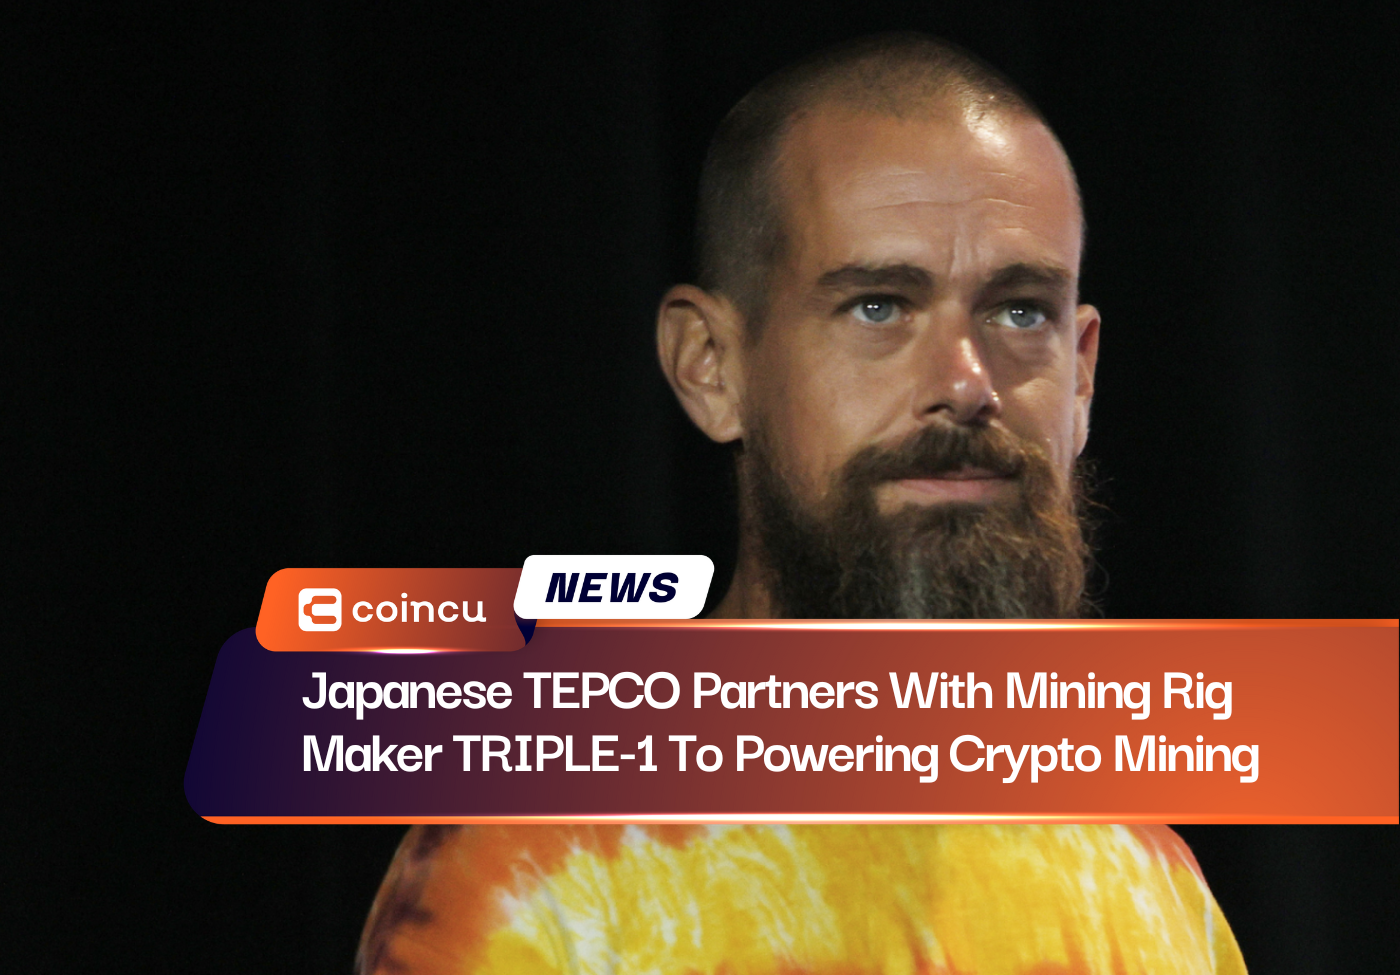 Japanese TEPCO Partners With Mining Rig Maker TRIPLE-1 To Powering Crypto Mining